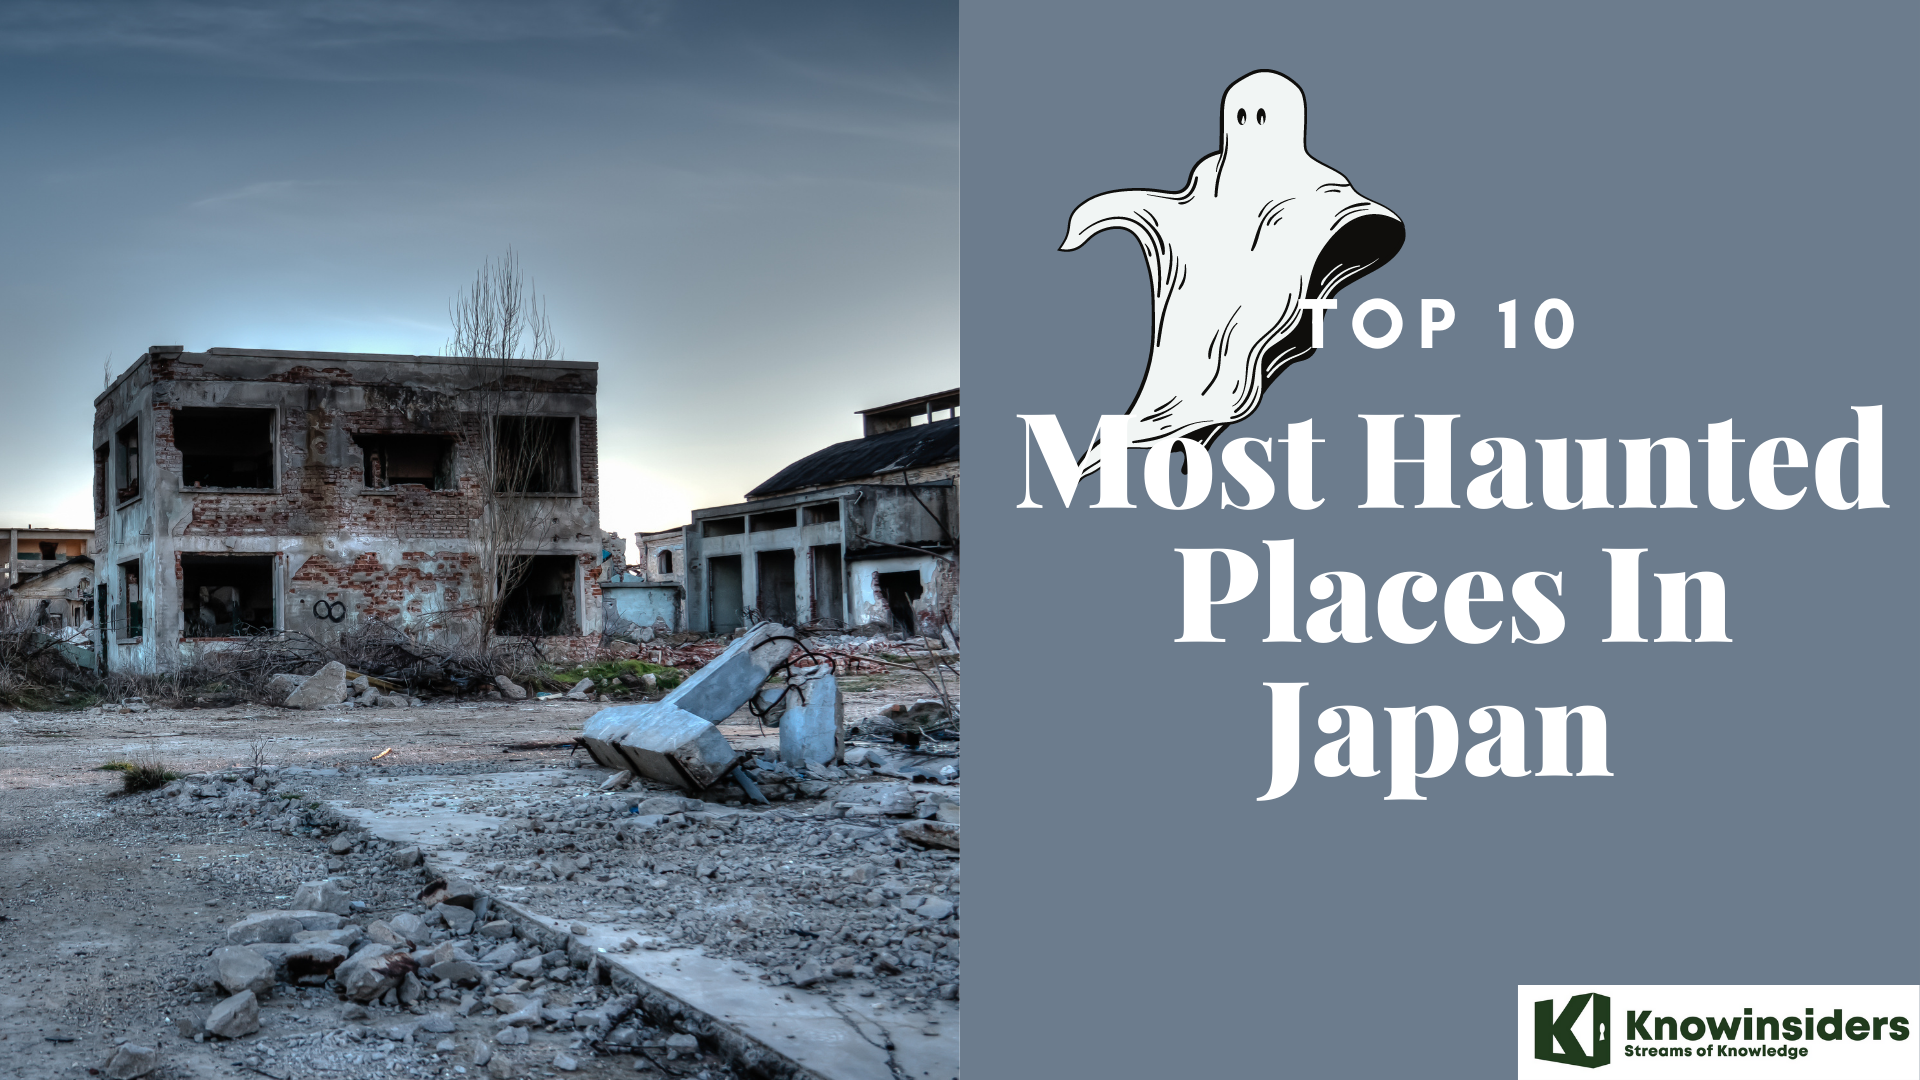 Top 10 Most Haunted & Ghostly Destinations in Japan